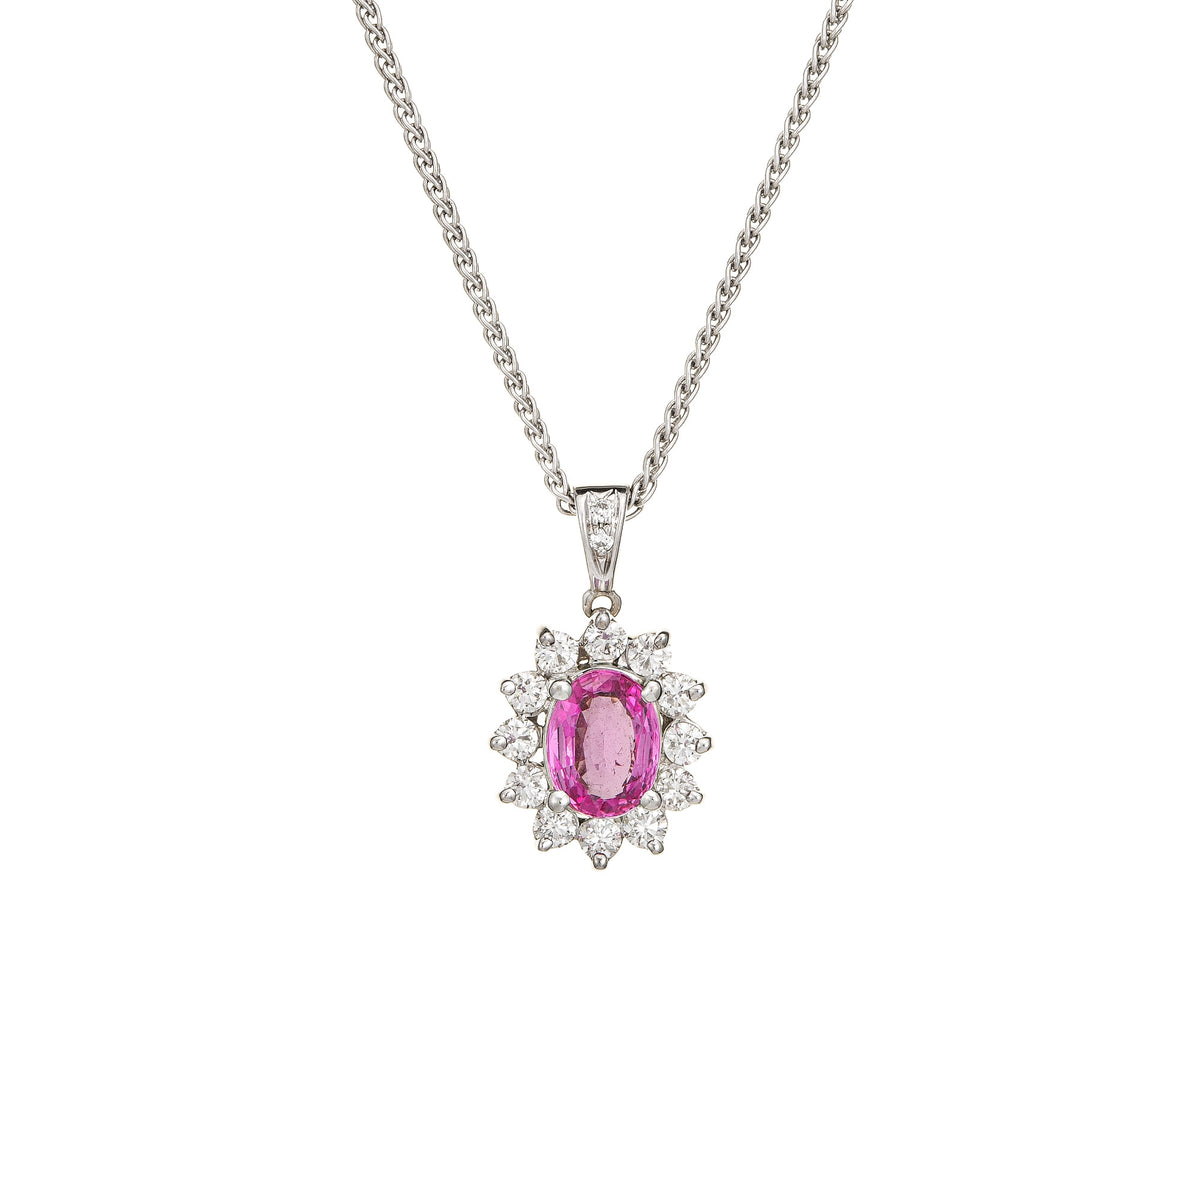 No Heat Natural Pink Sapphire Diamond Necklace 18K White Gold Vintage Jewelry